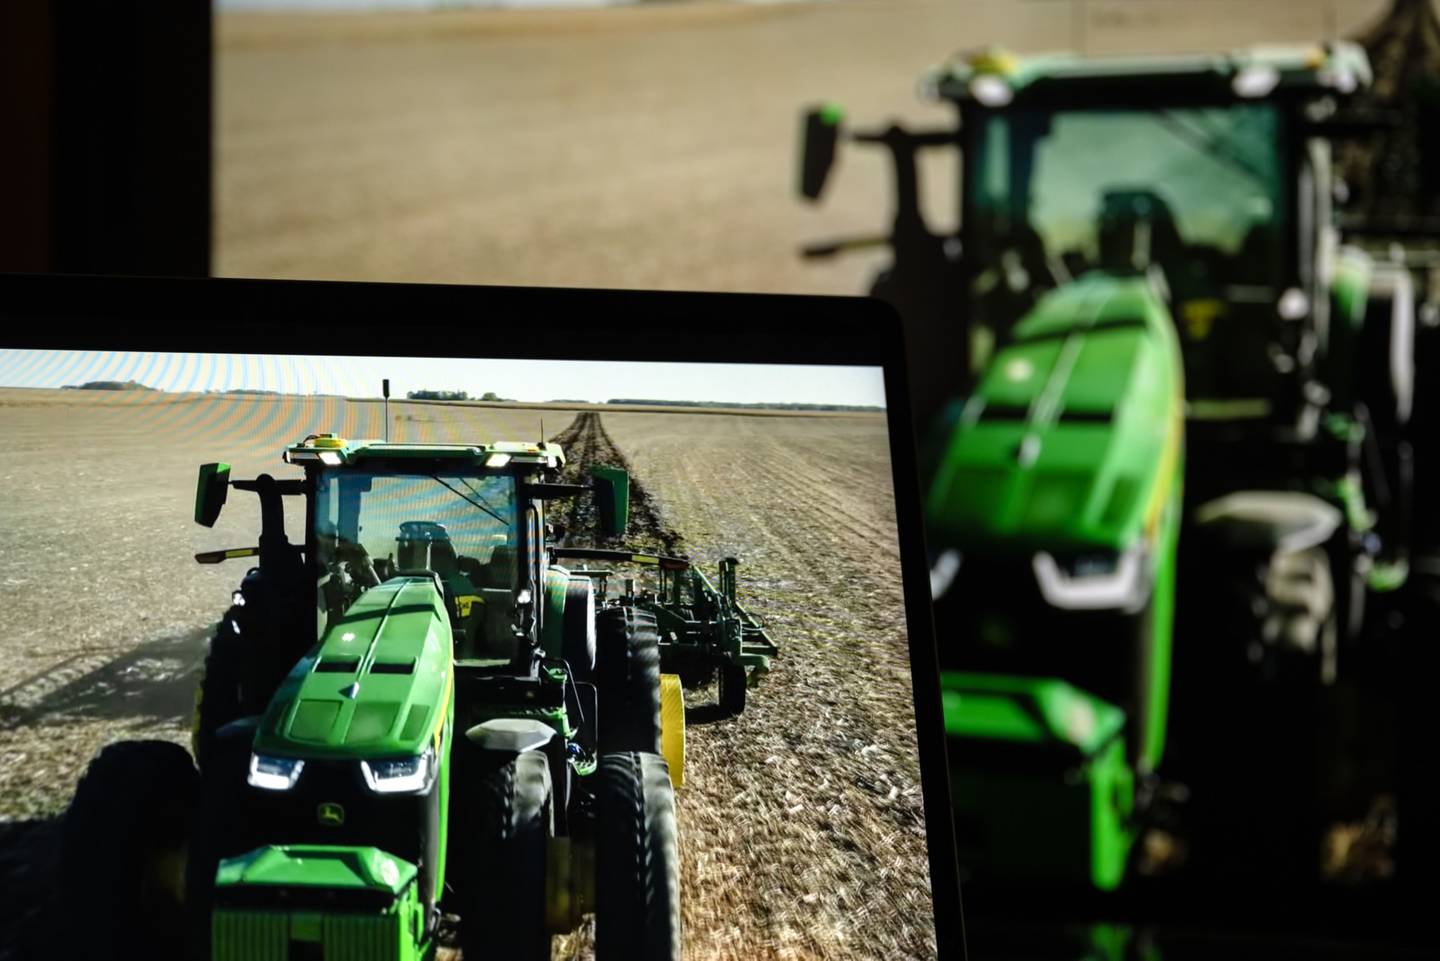 A fully autonomous tractor is debuted during a John Deere live-streamed event at the CES 2022 trade show in Las Vegas, Nevada, U.S., on Tuesday, Jan. 4, 2022.